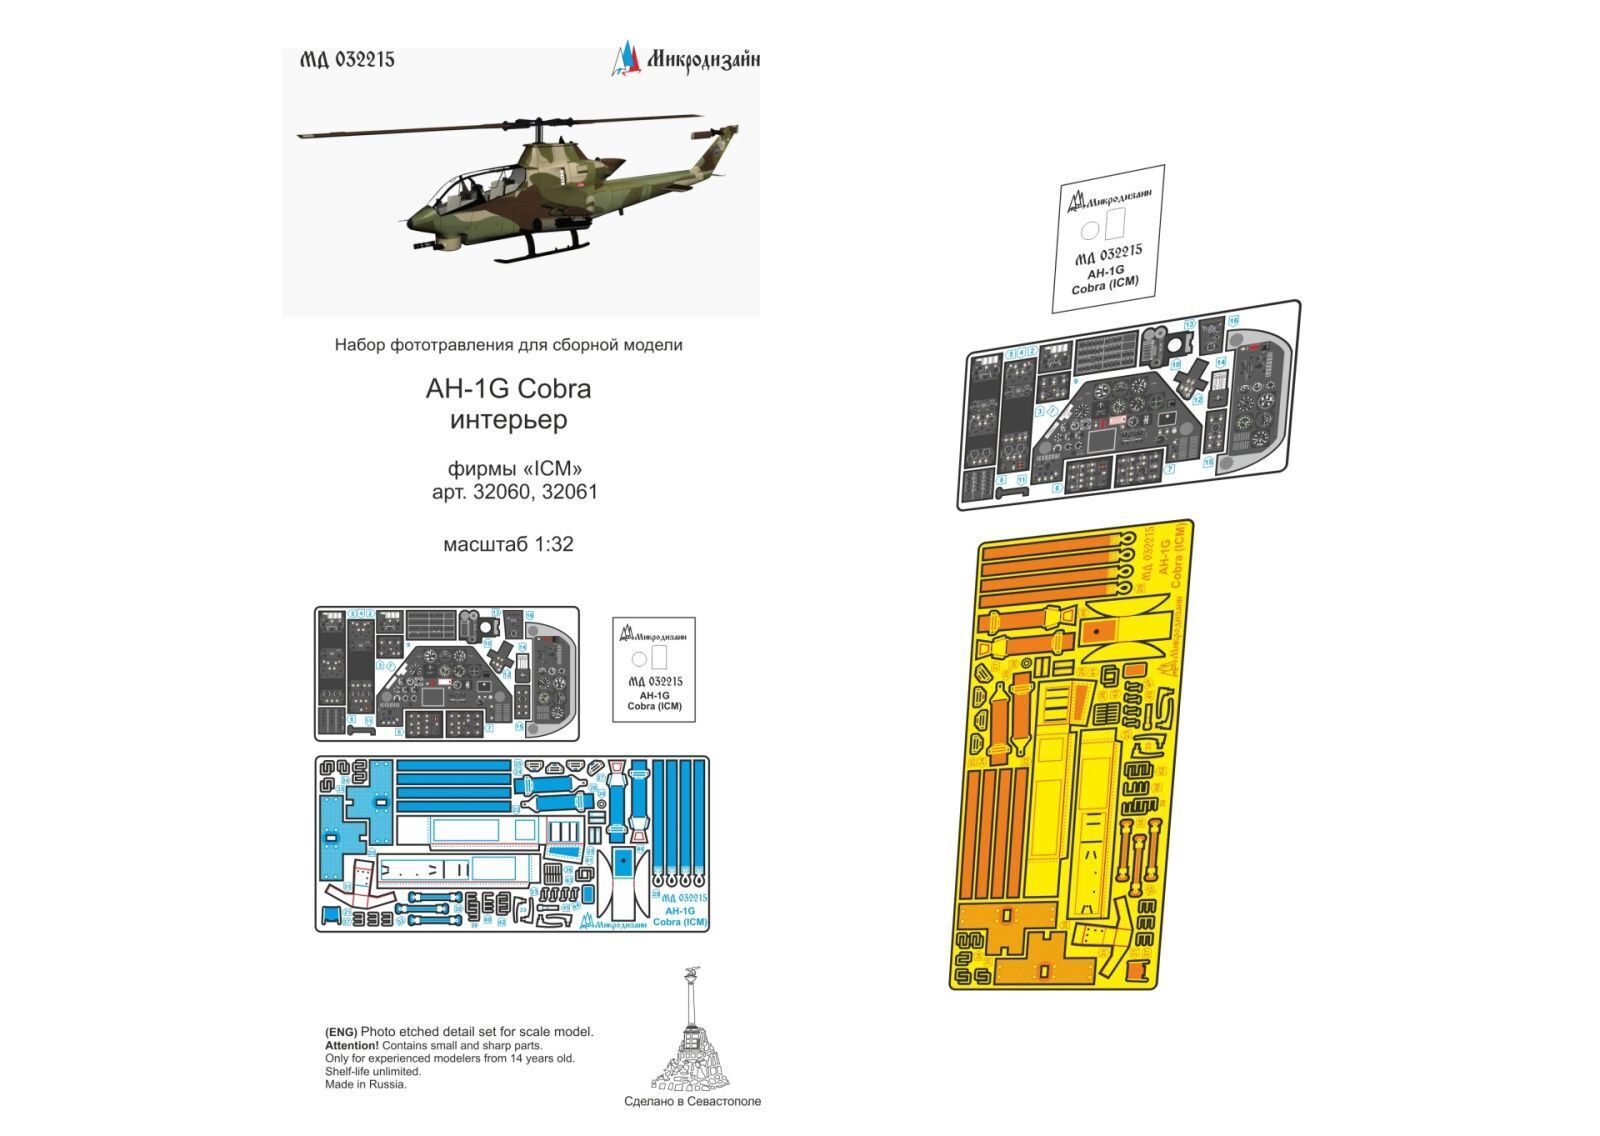 Photo-etched detailing set for AH-1G Cobra interior by ICM 32060, 32061 1/32